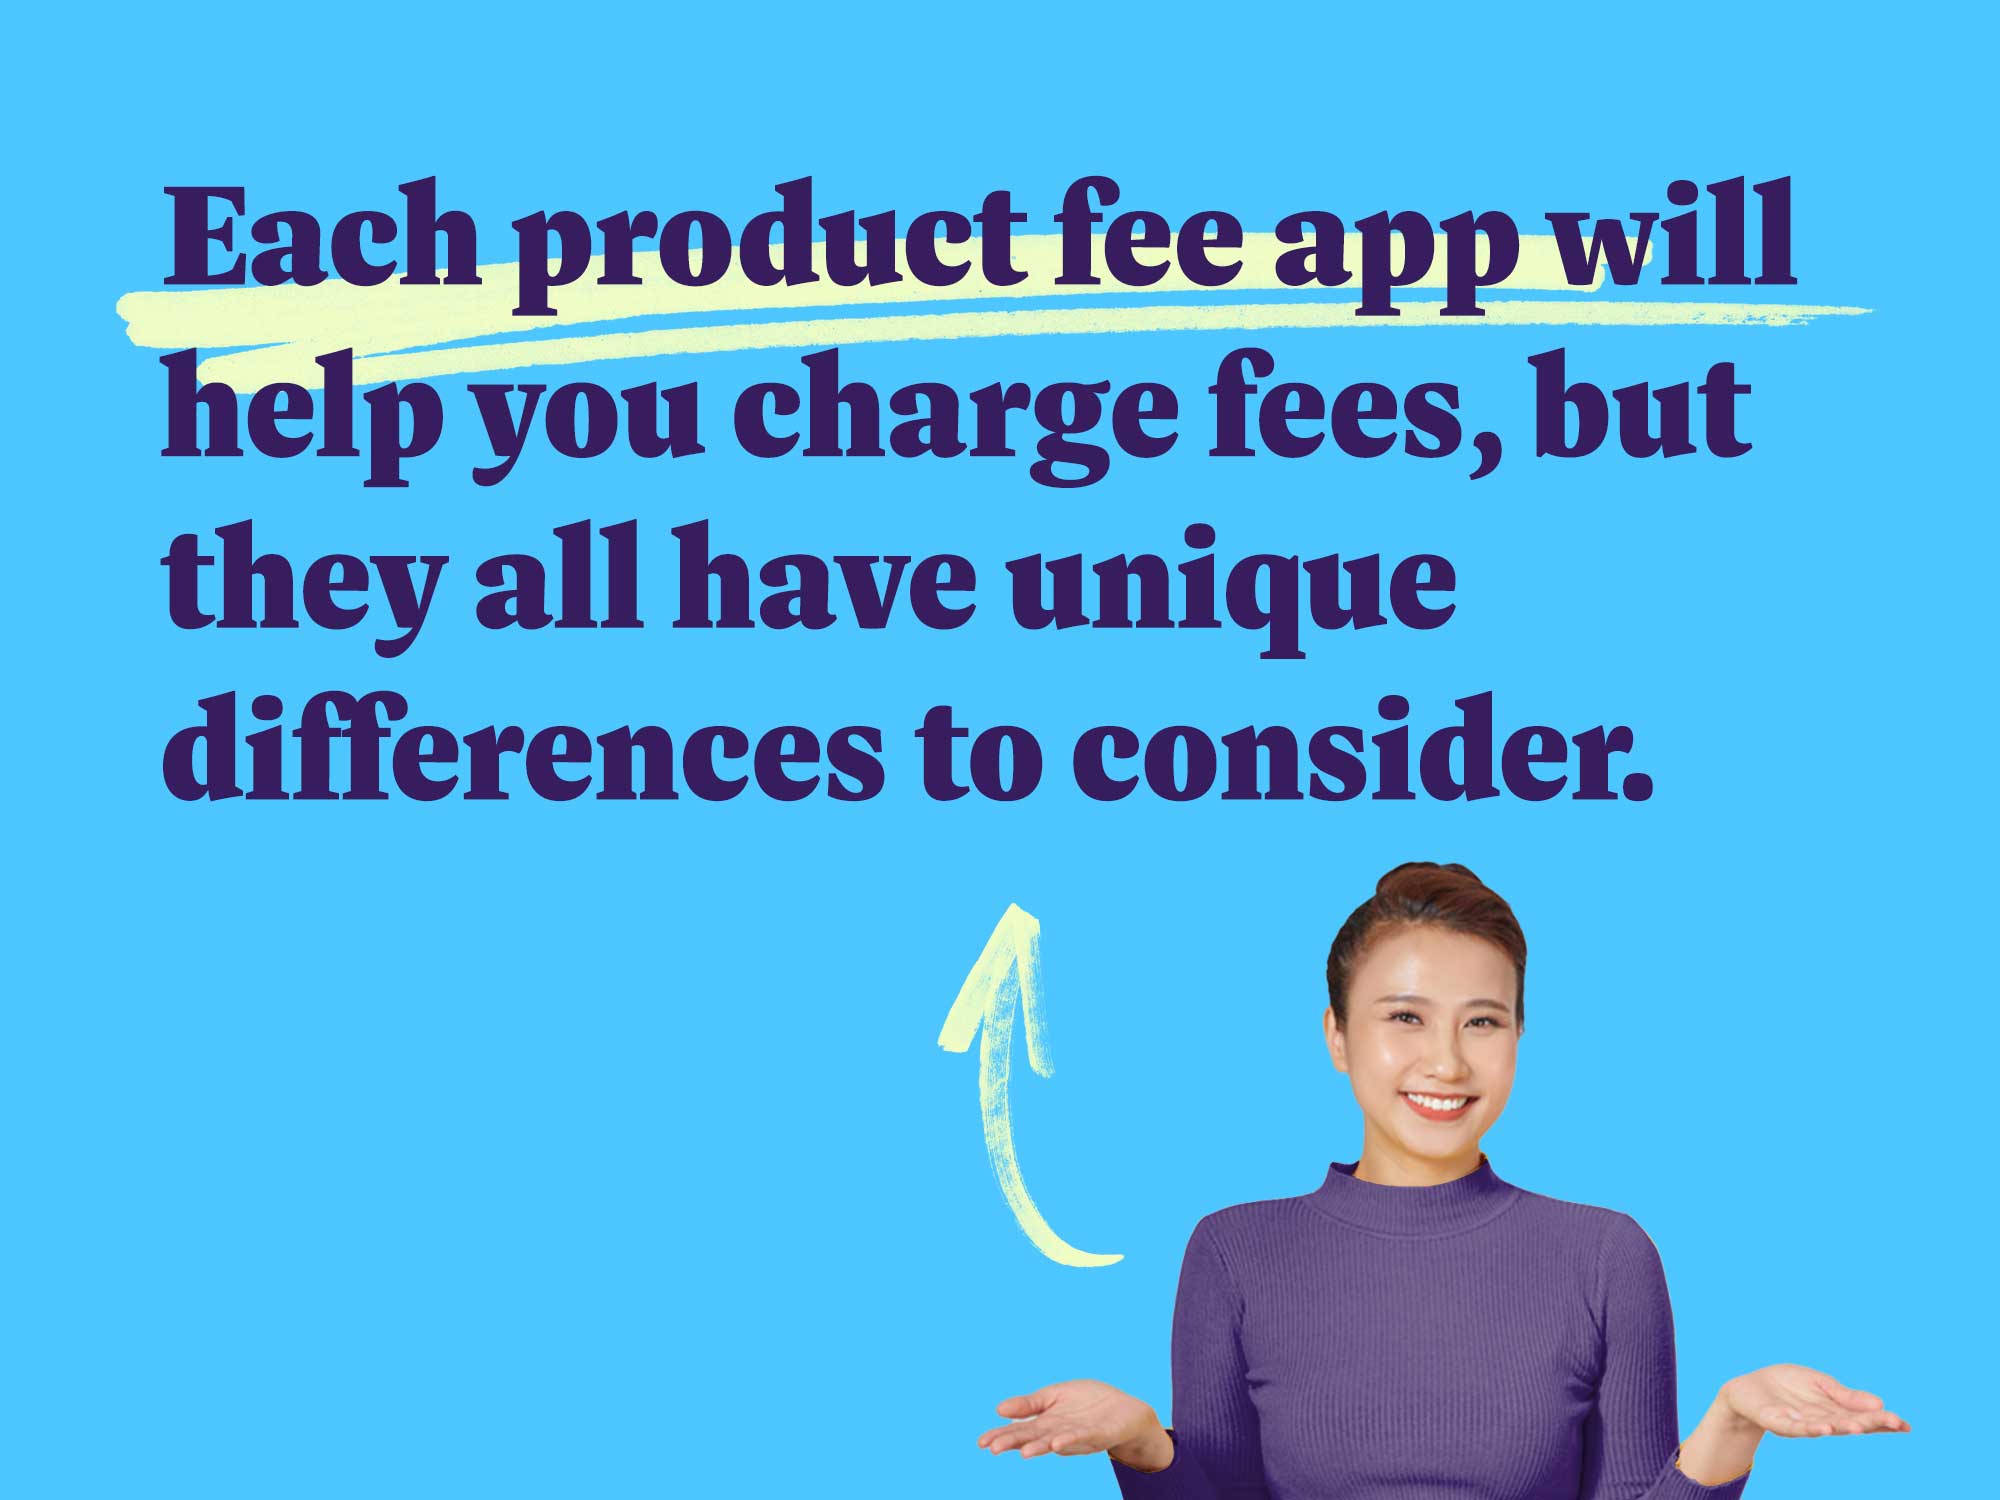 Each product fee app will help you charge fees, but they all have unique differences to consider.